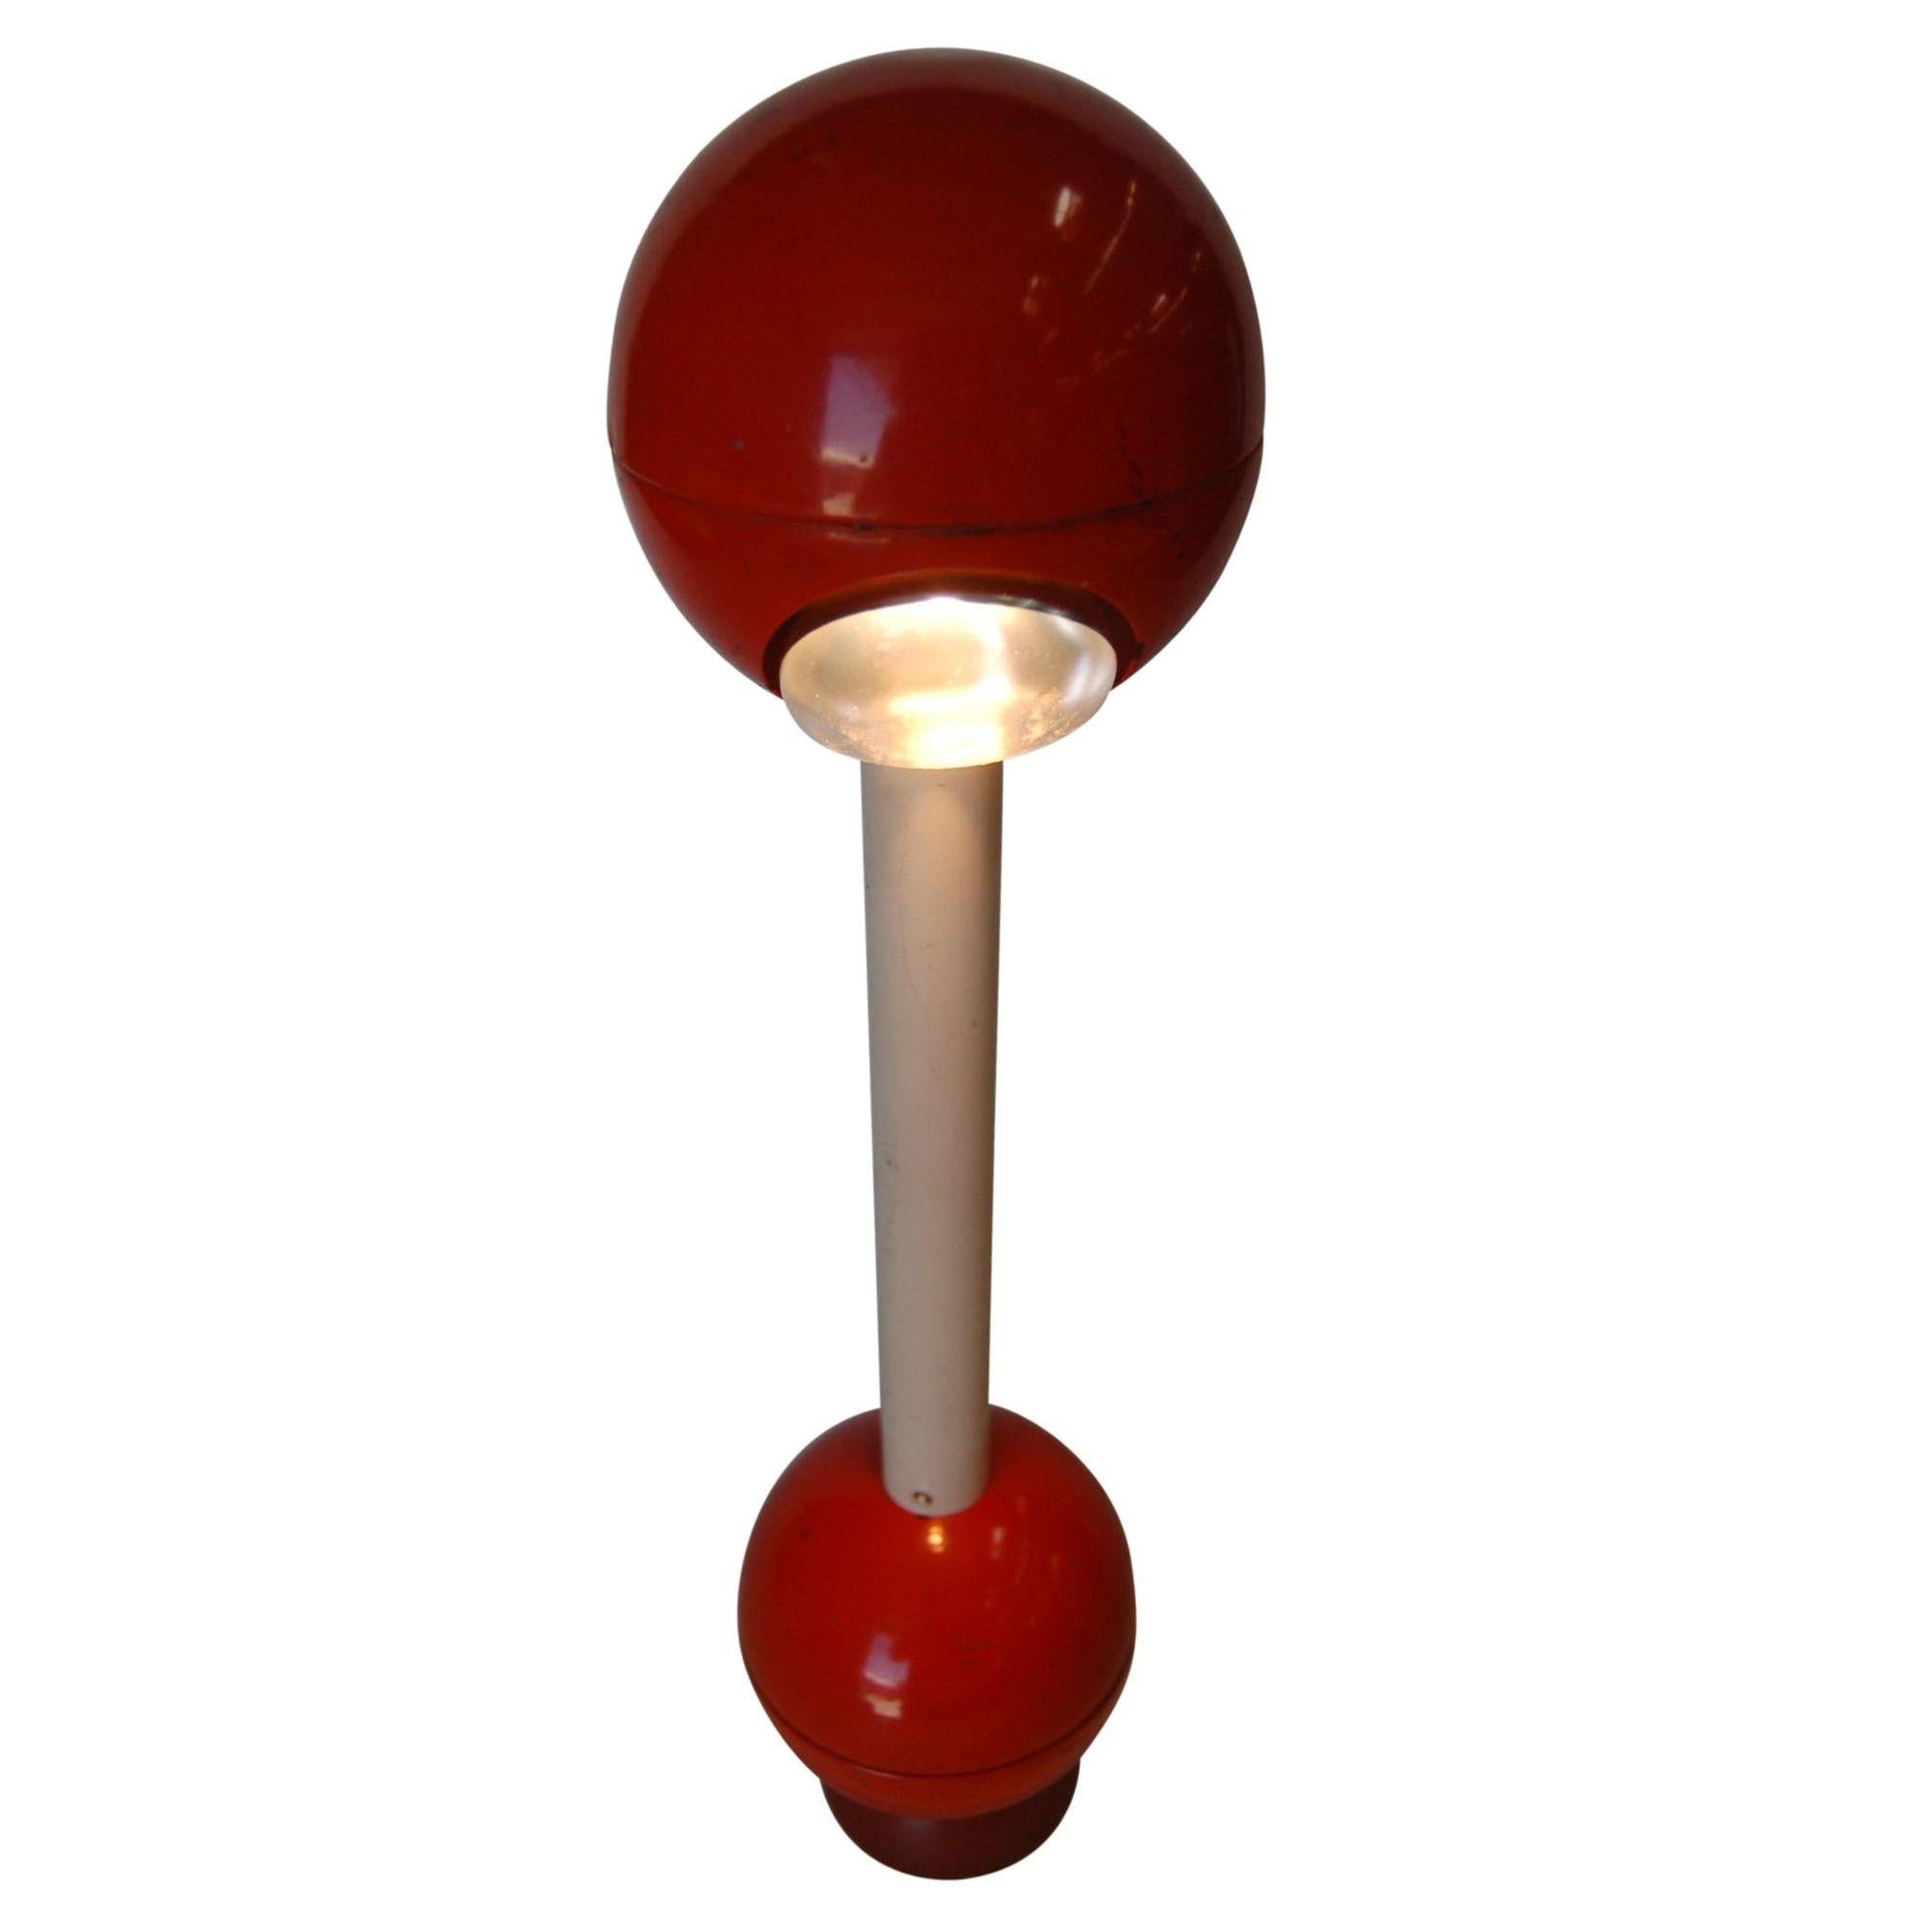 American Modernist Red Metal Double Ball Barbell Accent Table Lamp For Sale